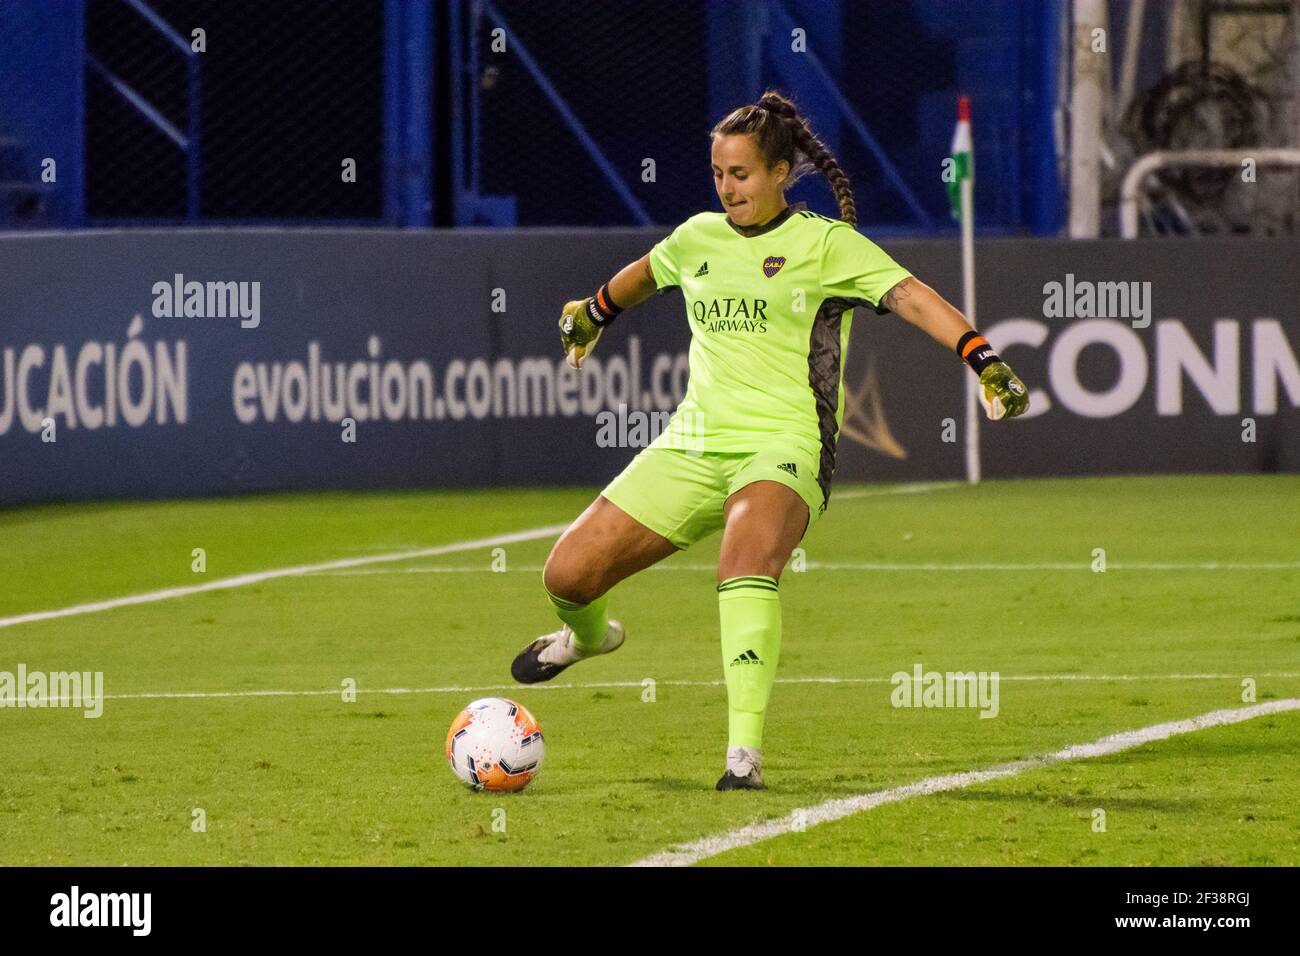 Buenos Aires, Argentina. 14th Mar, 2021. Laurina Oliveros (#1 Boca) during the game between Boca Juniors and America de Cali at Jose Amalfitani Stadium in Liniers, Buenos Aires, Argentina. Credit: SPP Sport Press Photo. /Alamy Live News Stock Photo